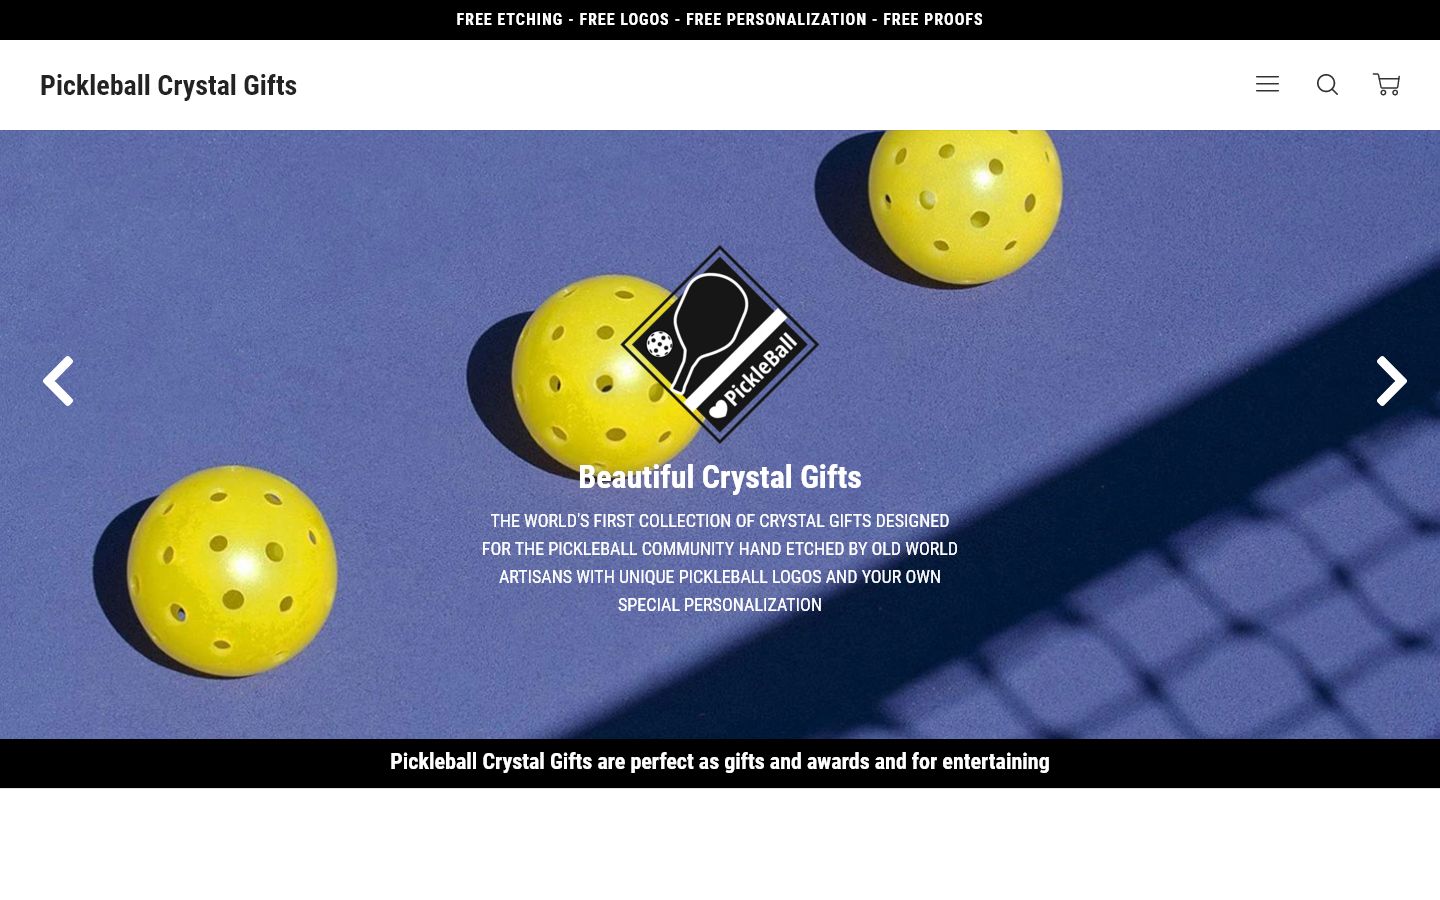 Pickleball Crystal Gifts